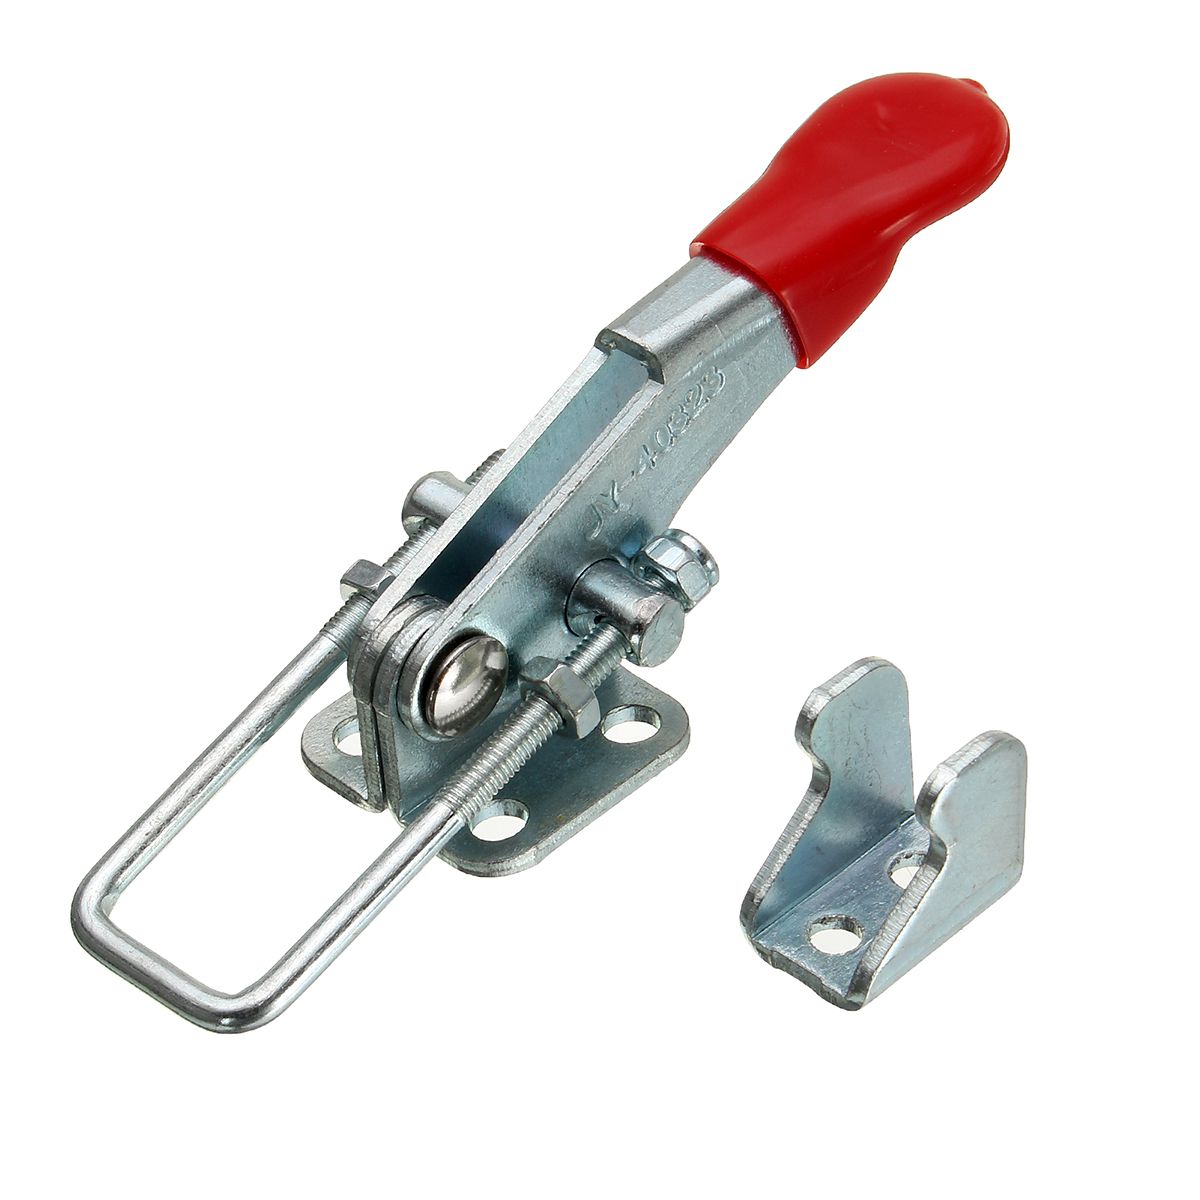 2Pcs-Spring-Loaded-Toggle-Galvanized-Iron-Latch-Catches-Hasp-for-Case-Box-Chest-Trunk-1122427